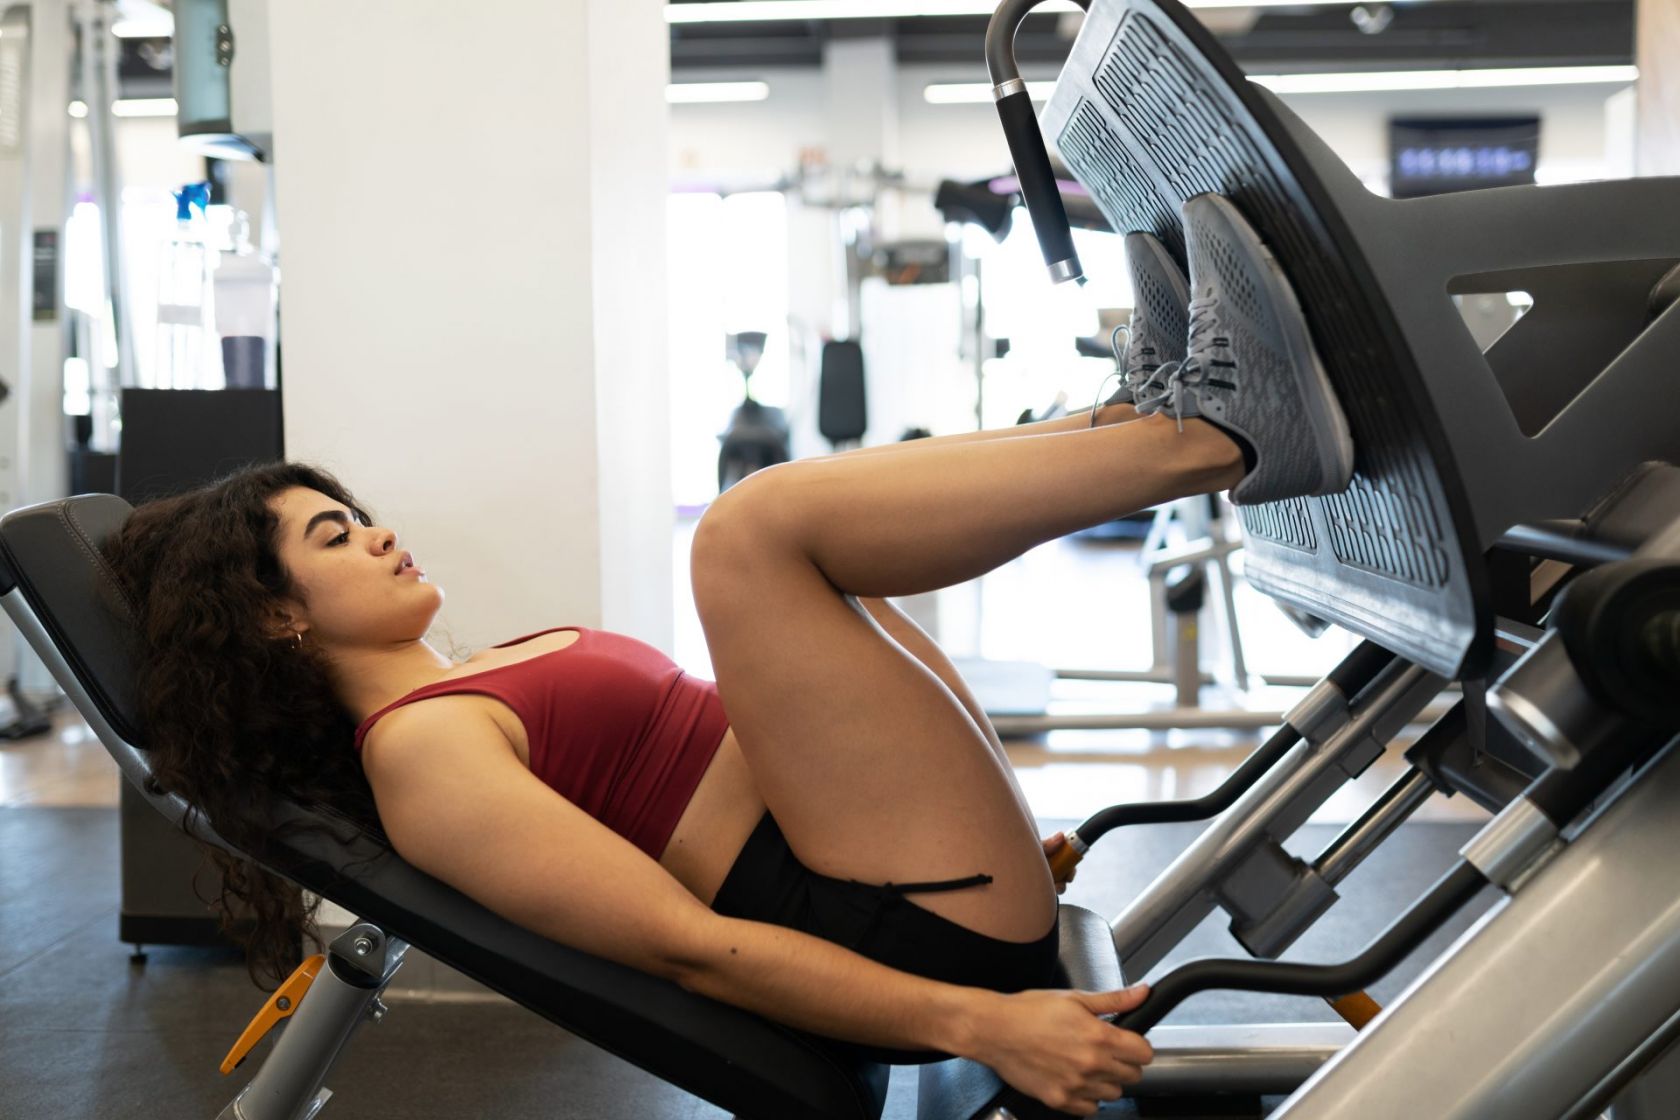 How to set up and use a lying leg press in a lower body workout